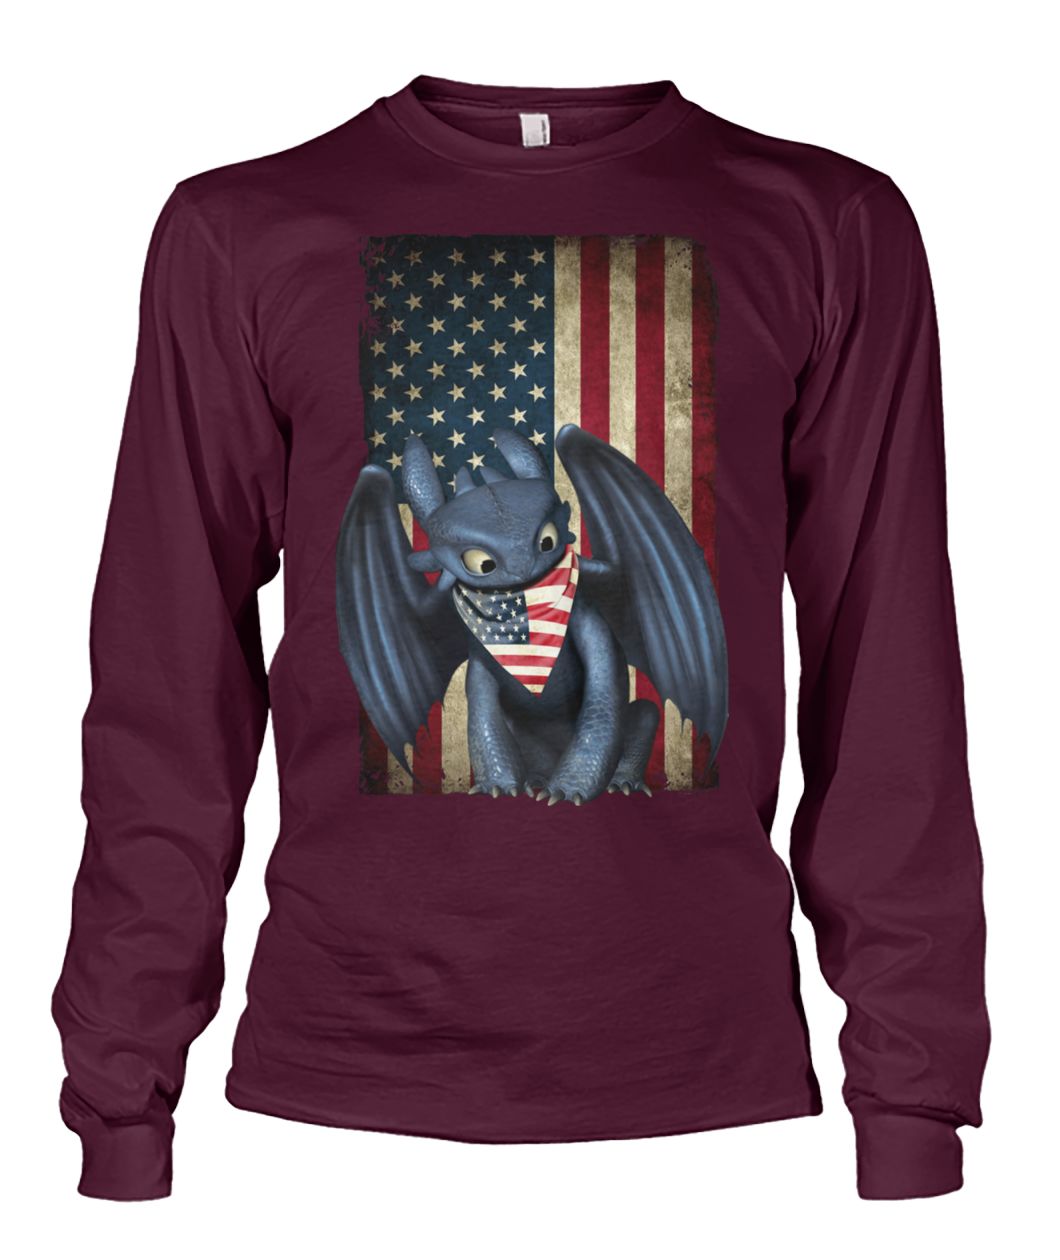 Toothless american flag 4th of july unisex long sleeve